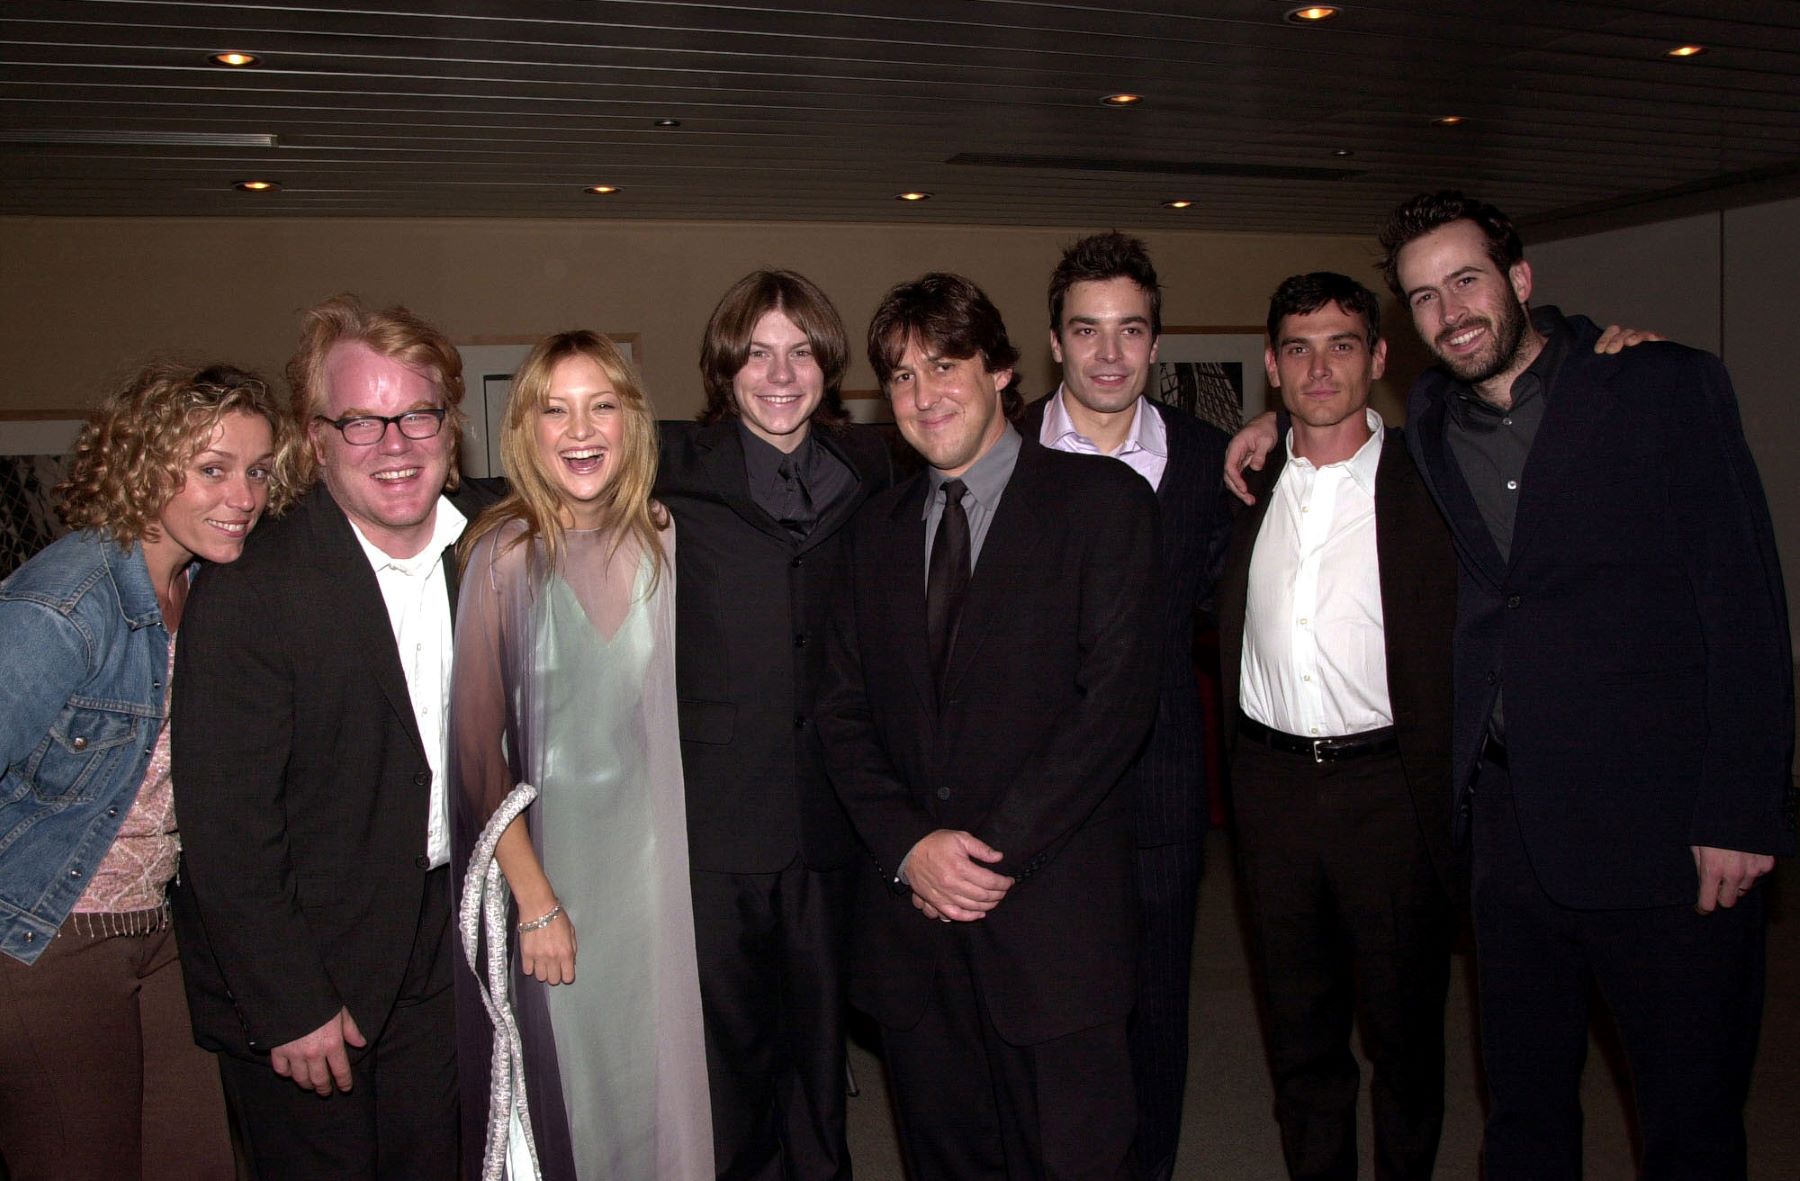 An 'Almost Famous' cast party at the 25th Toronto International Film Festival featuring Kate Hudson and Patrick Fugit